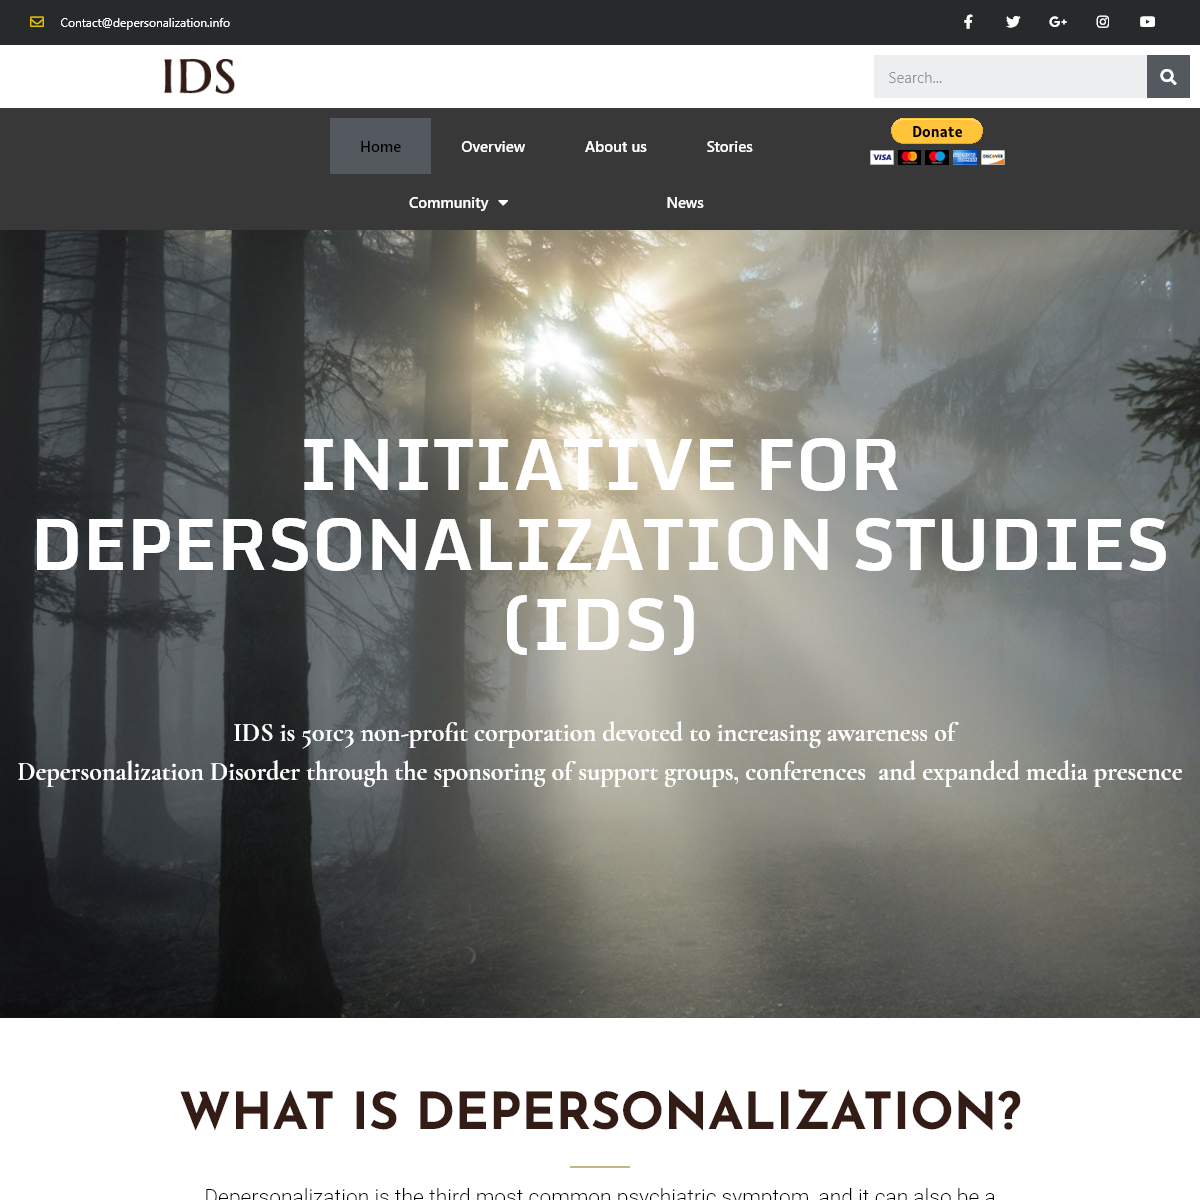 A complete backup of depersonalization.info